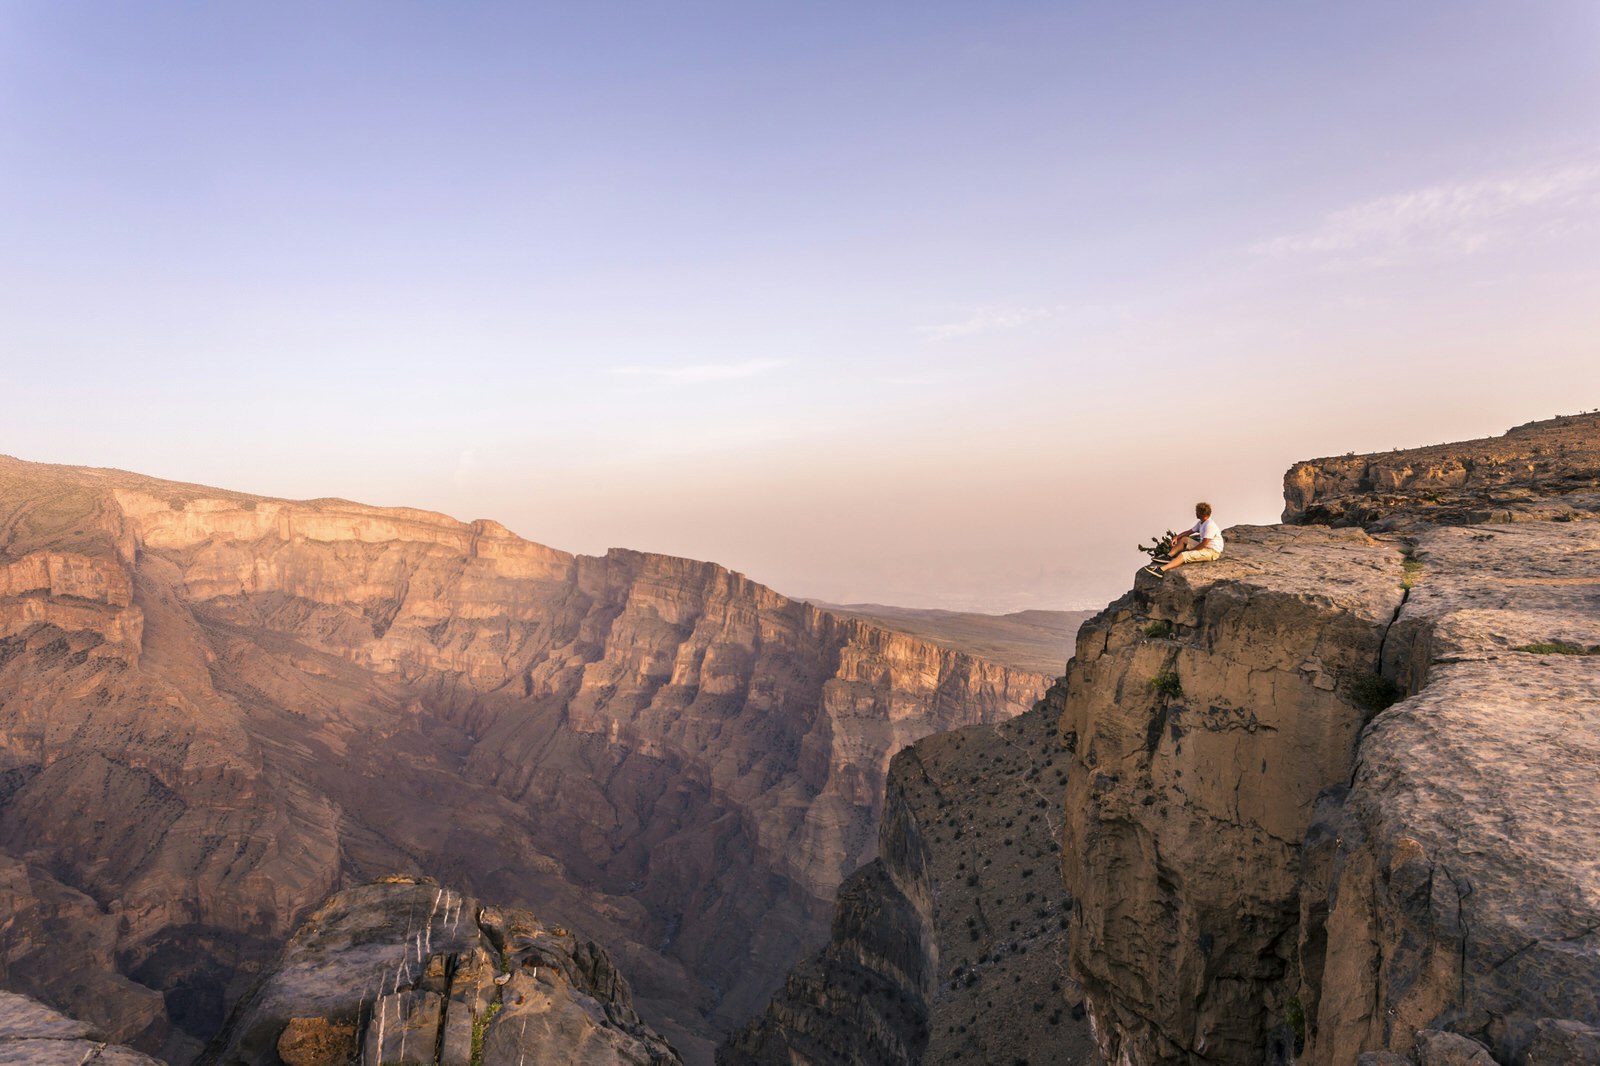 Oman, Wadi Ghul, Jebel Shams. The Grand canyon of Oman, tourist on the edge looking at view, at sunset ©  Matteo Colombo / Getty Images